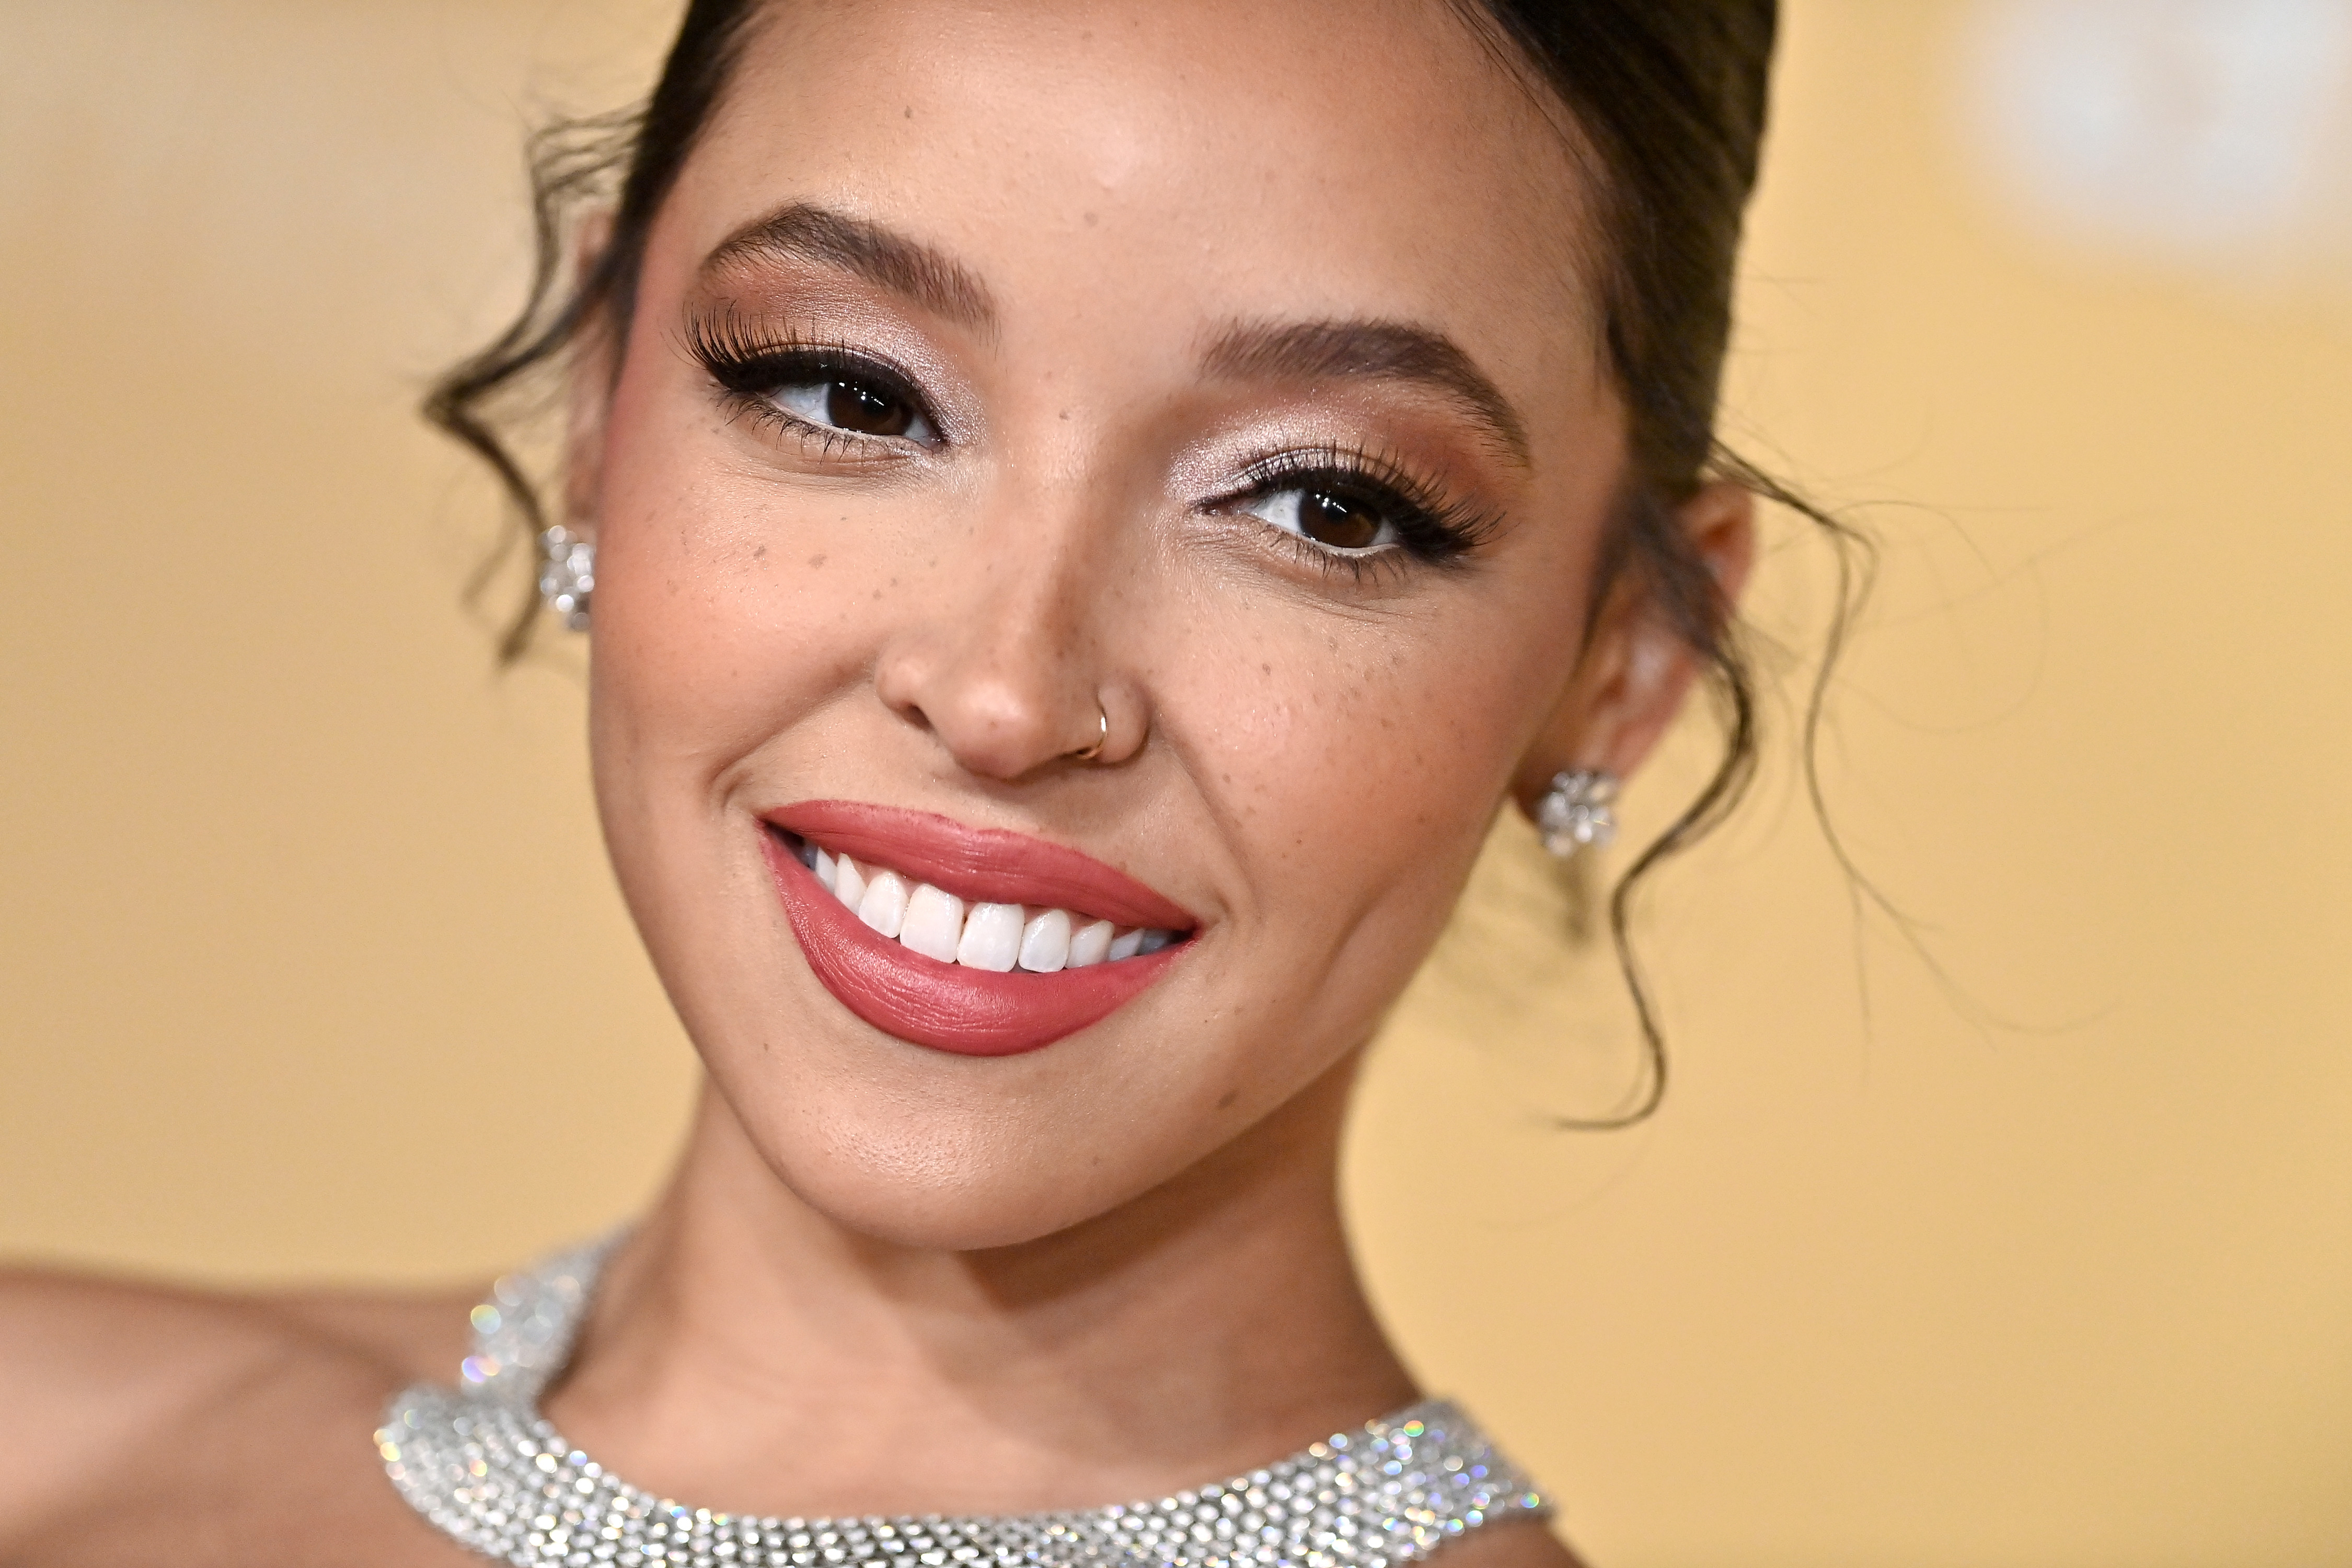 Close-up of Tinashe at a media event smiling and wearing a bejeweled choker